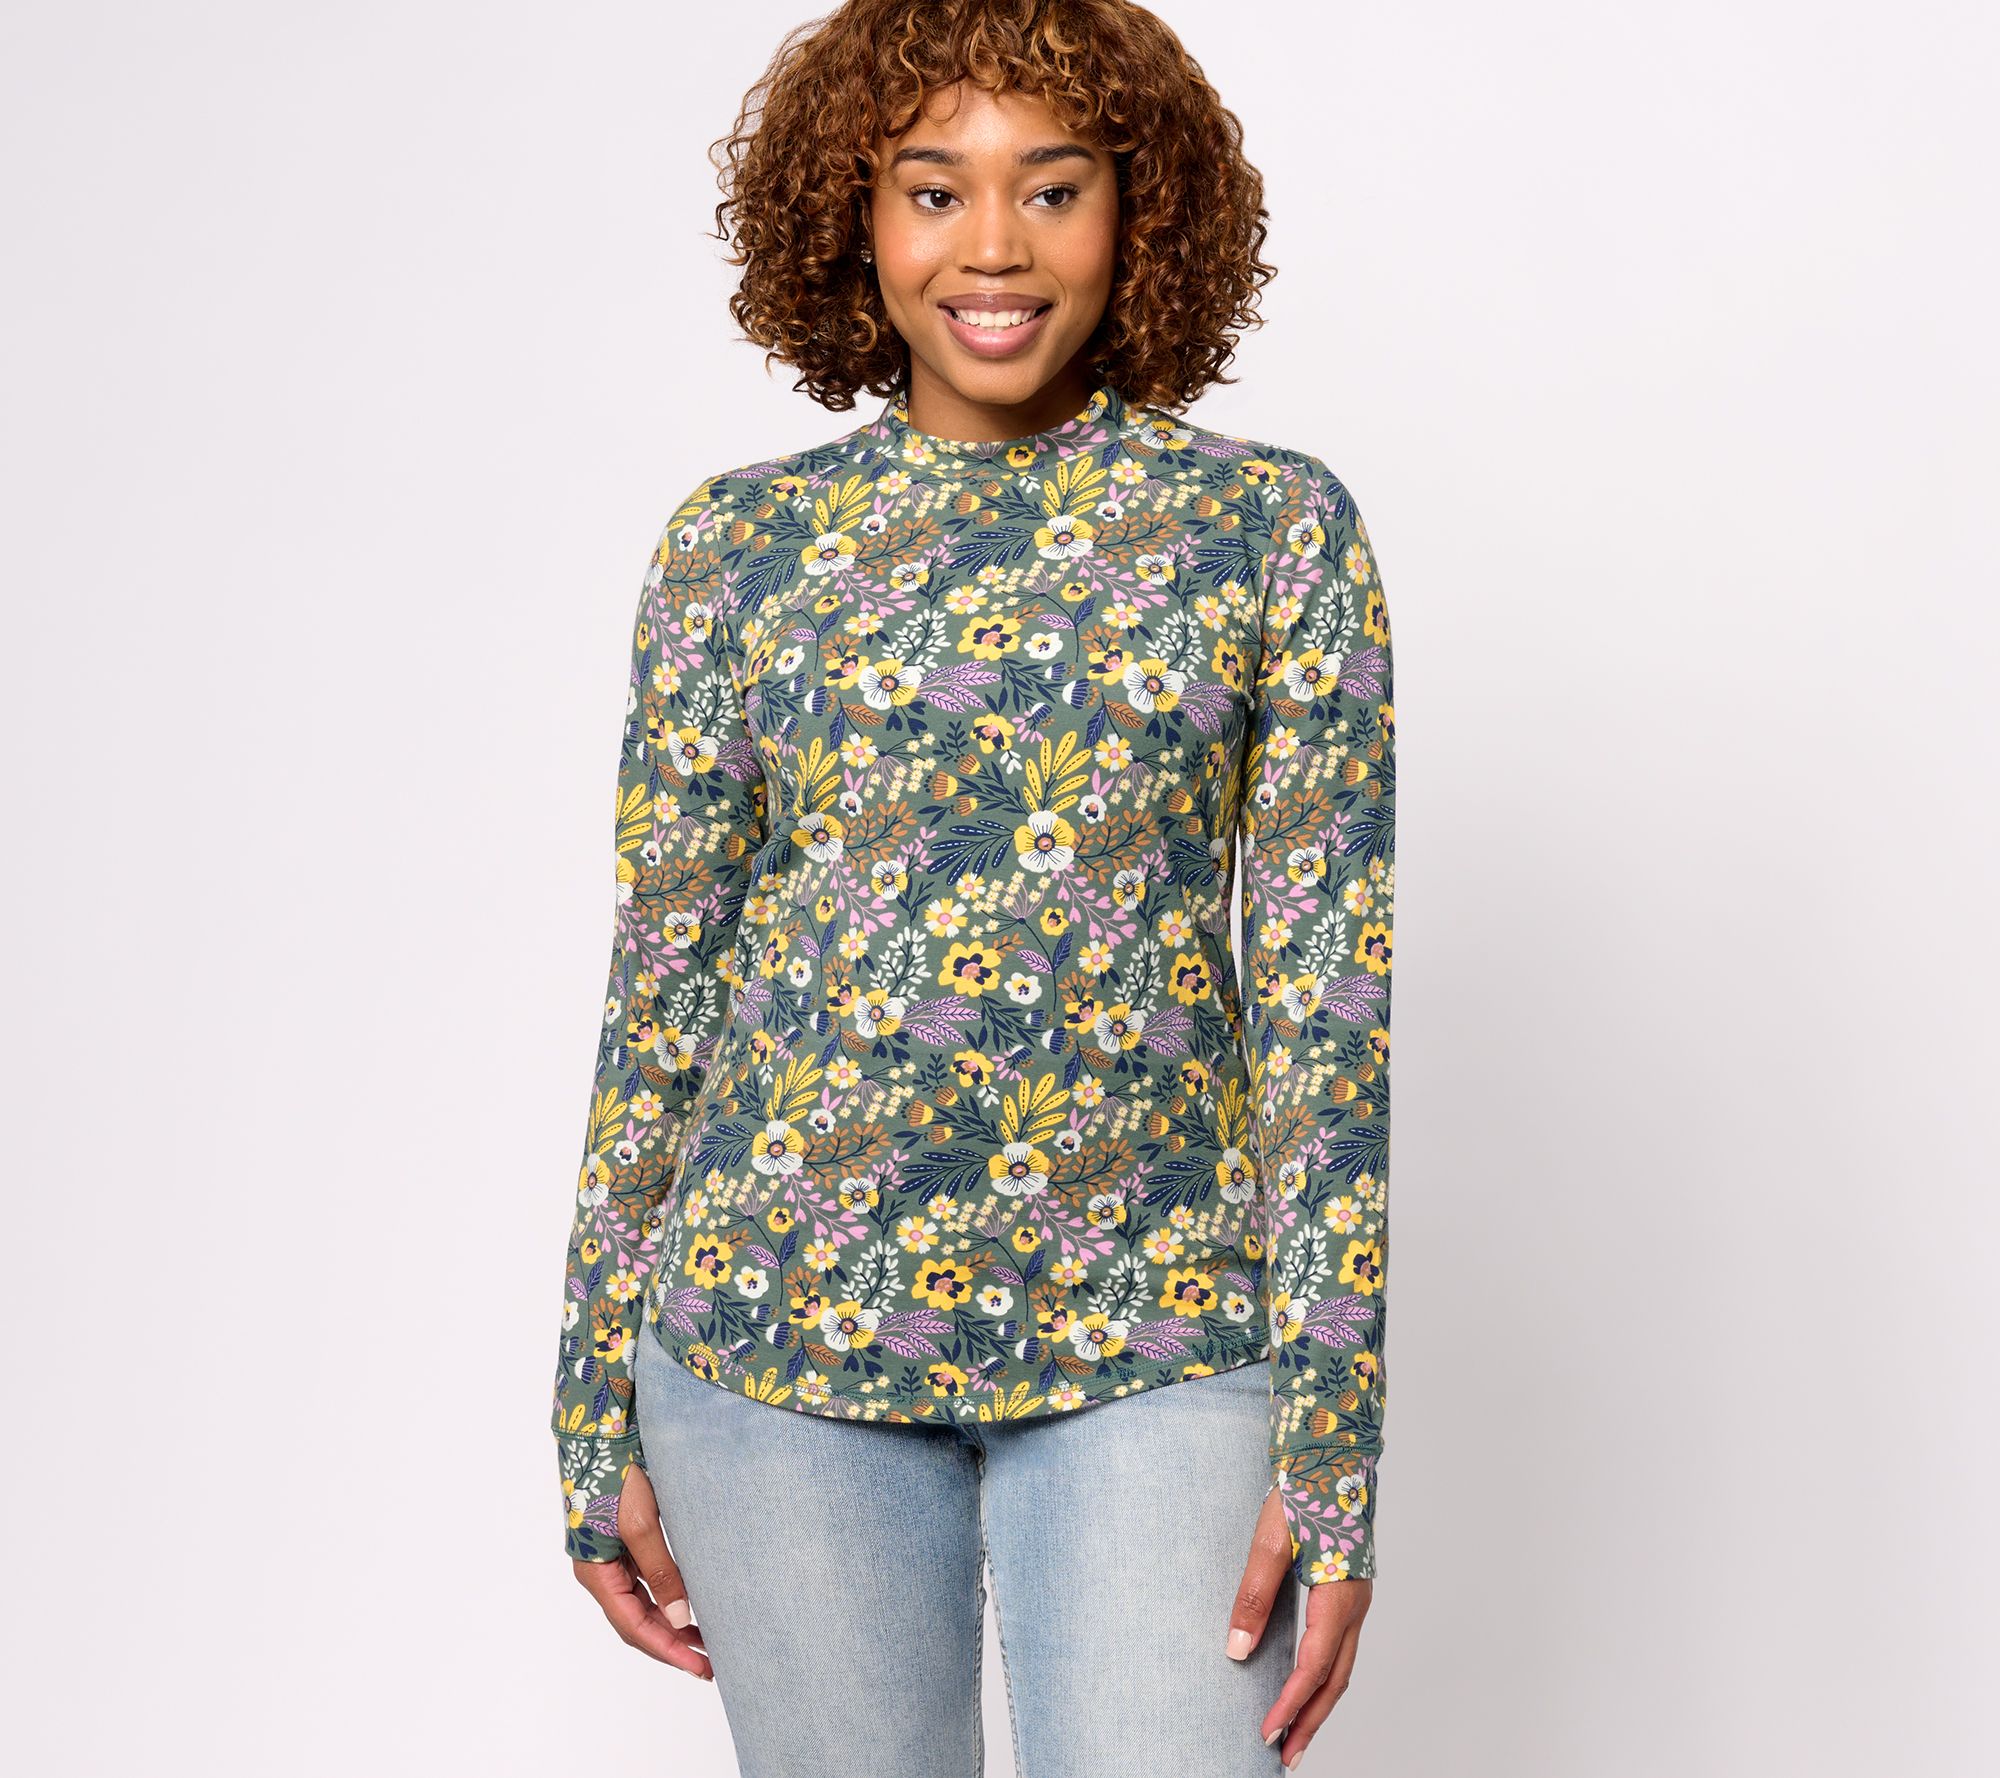 Denim & Co. Active Printed Jersey Mock Neck L/S Top with Curved Hem